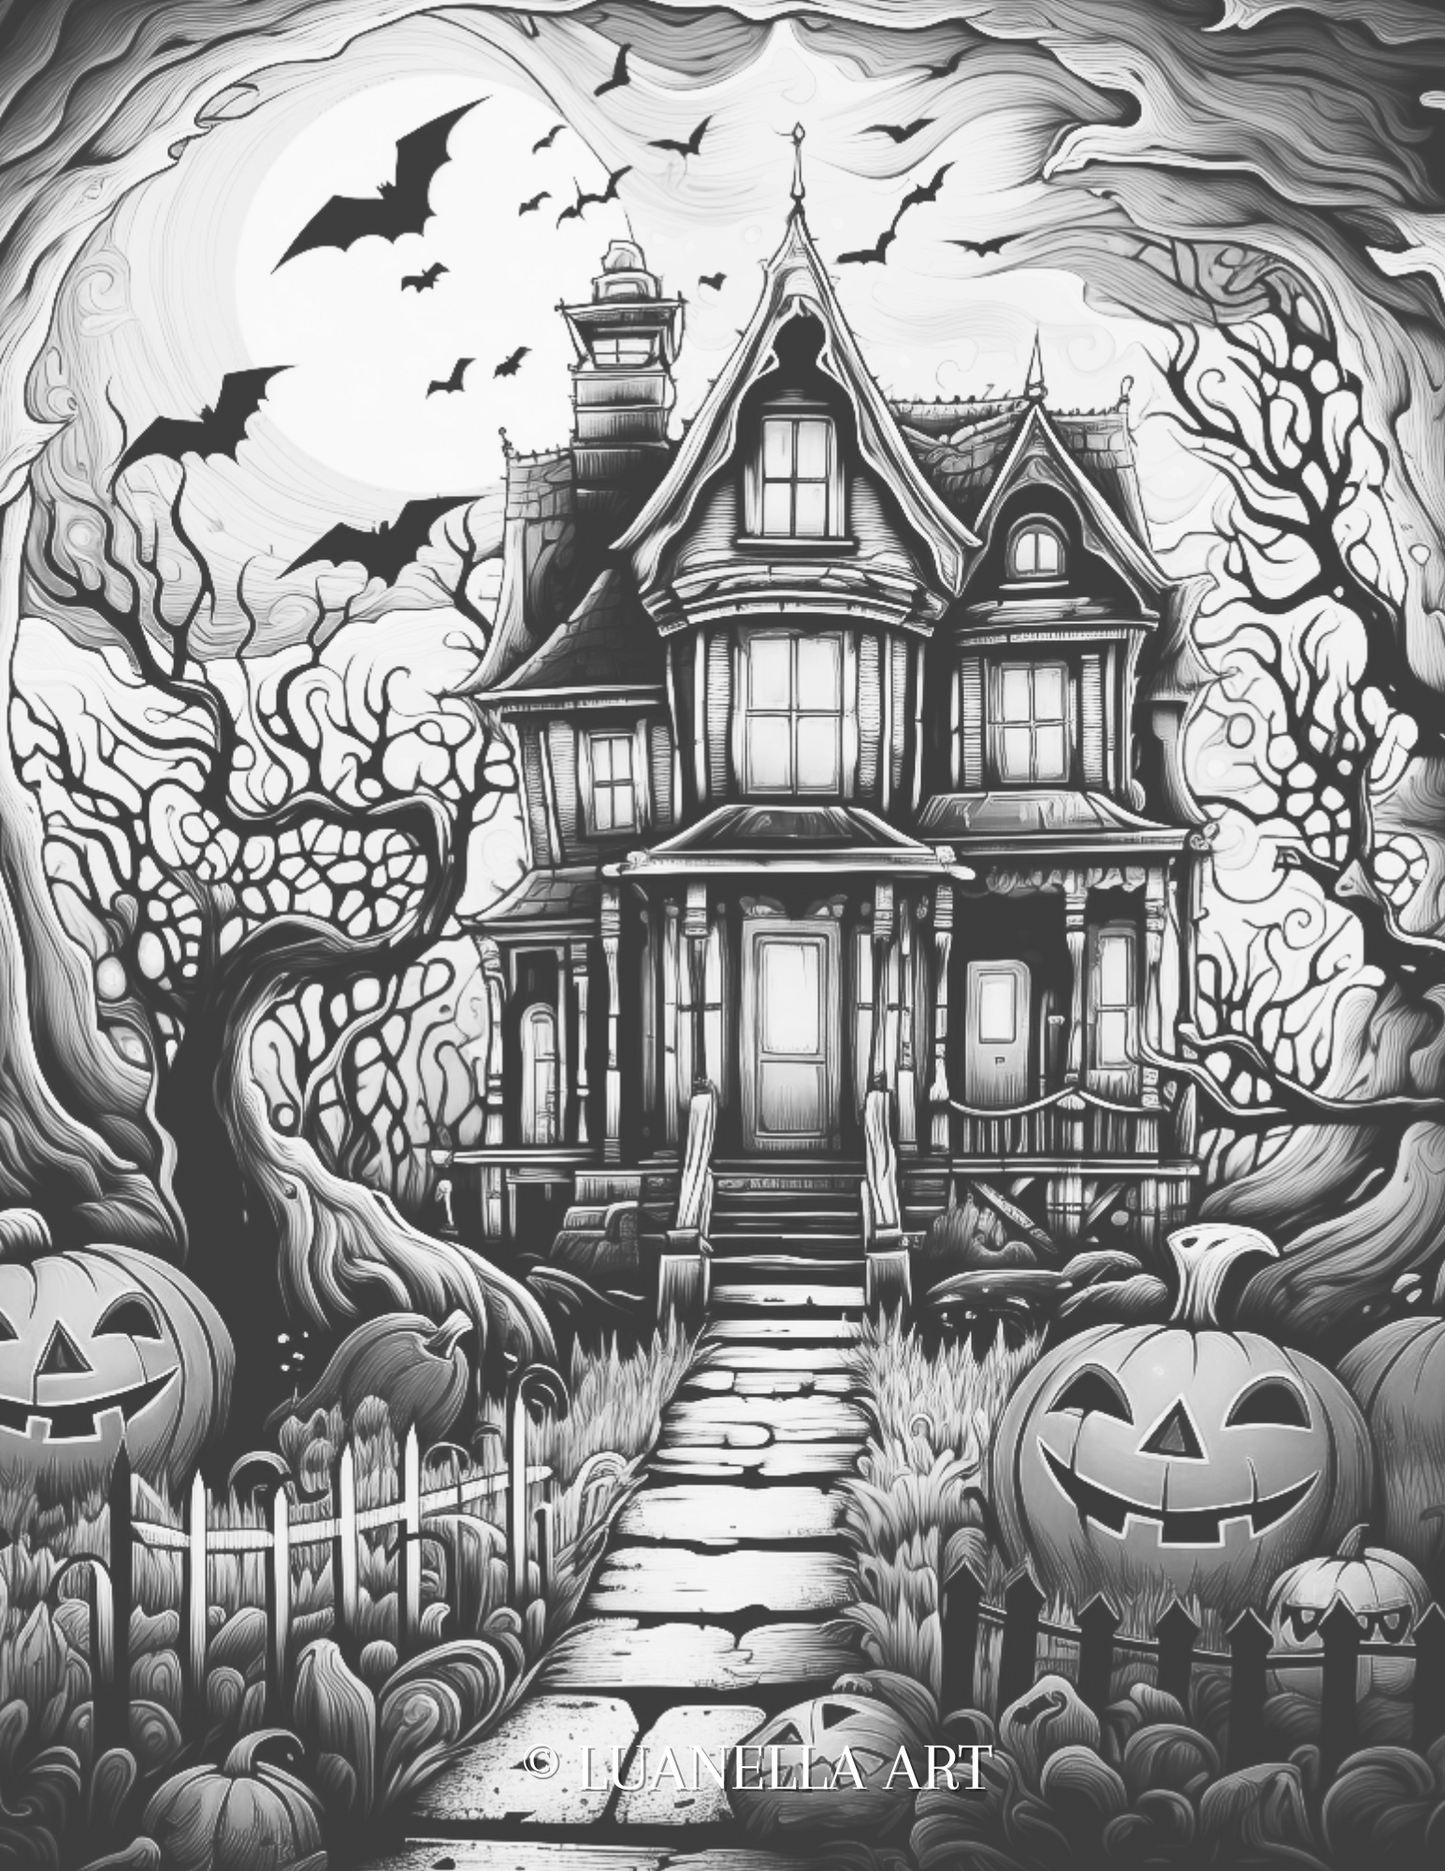 Super Scary Haunted House | Coloring Page | Instant Digital Download